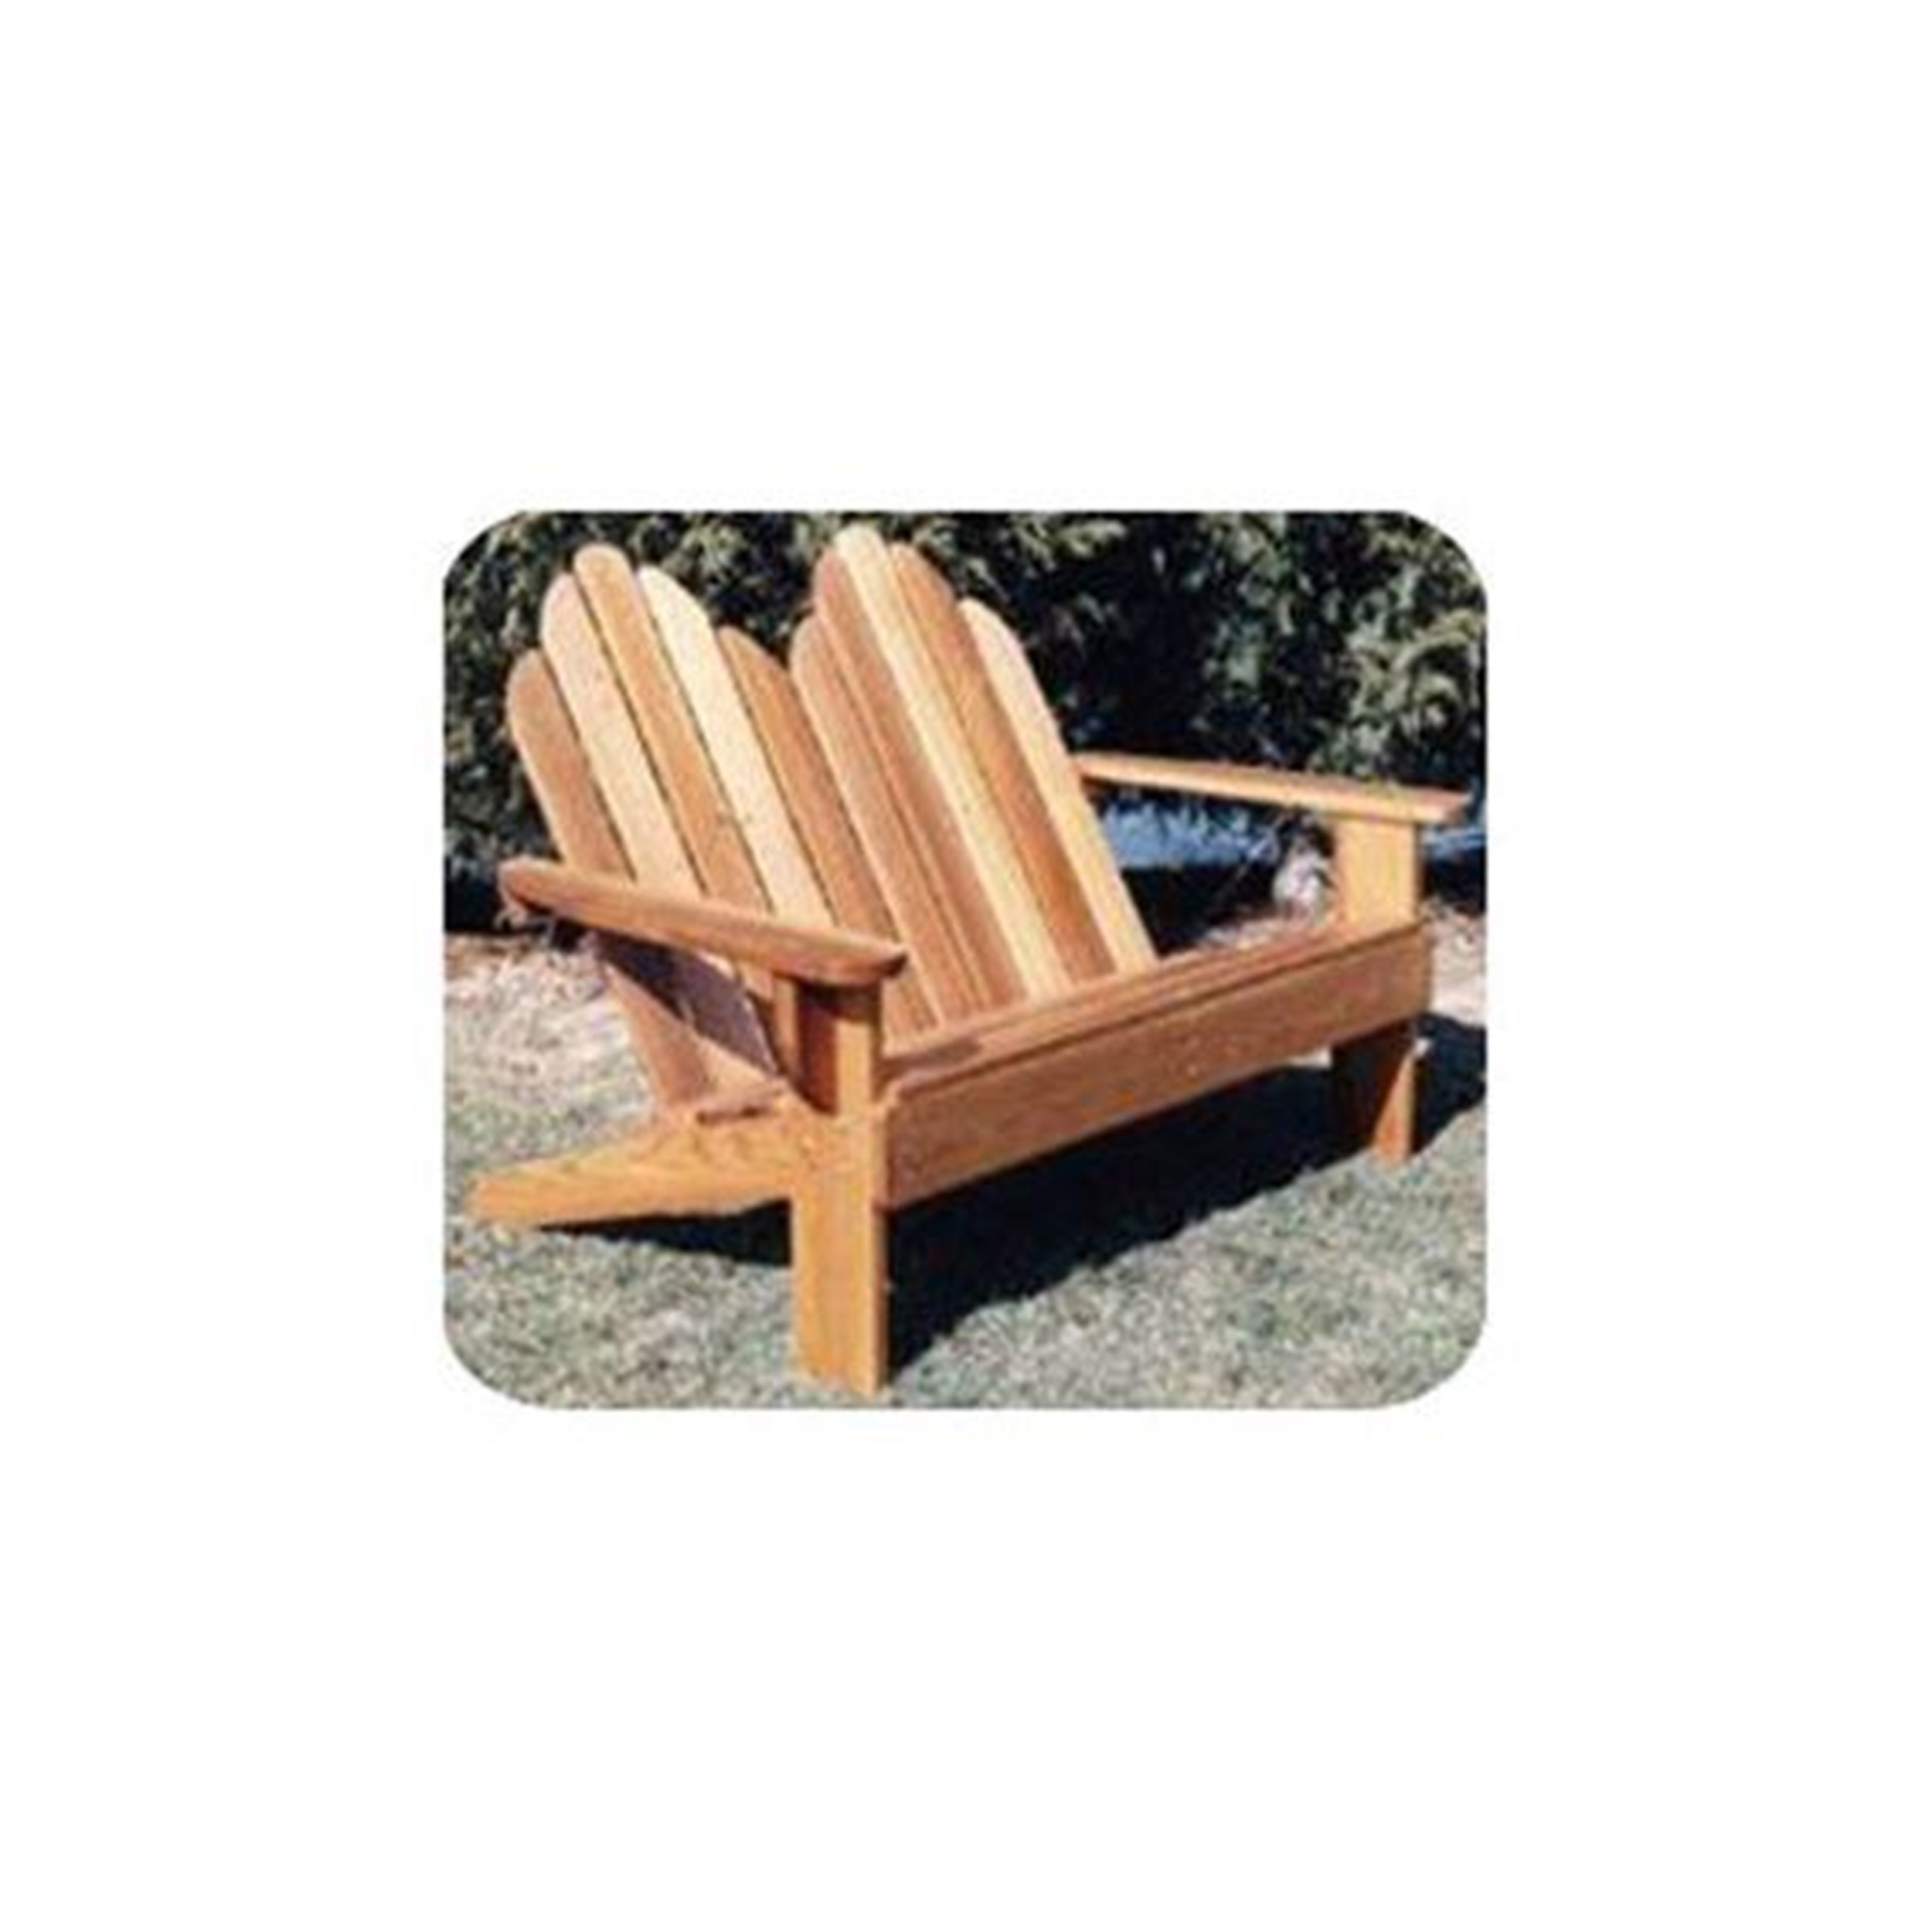 Woodworking Project Paper Plan To Build Classic Adirondack Loveseat